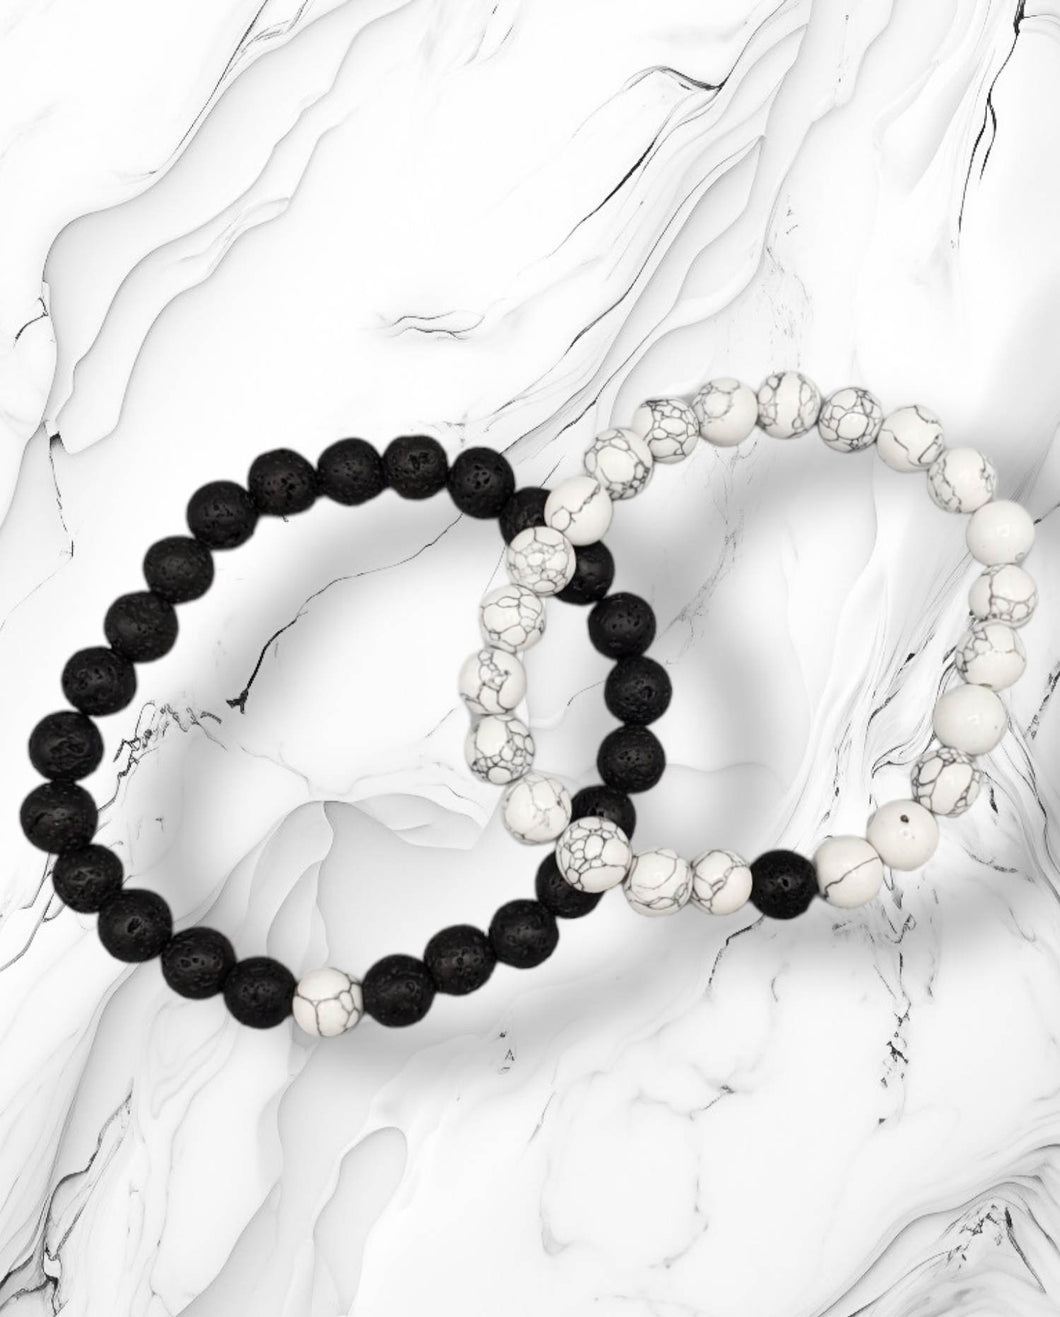 Opposites Attract Black and White Stretchy Bracelet (Set of 2)